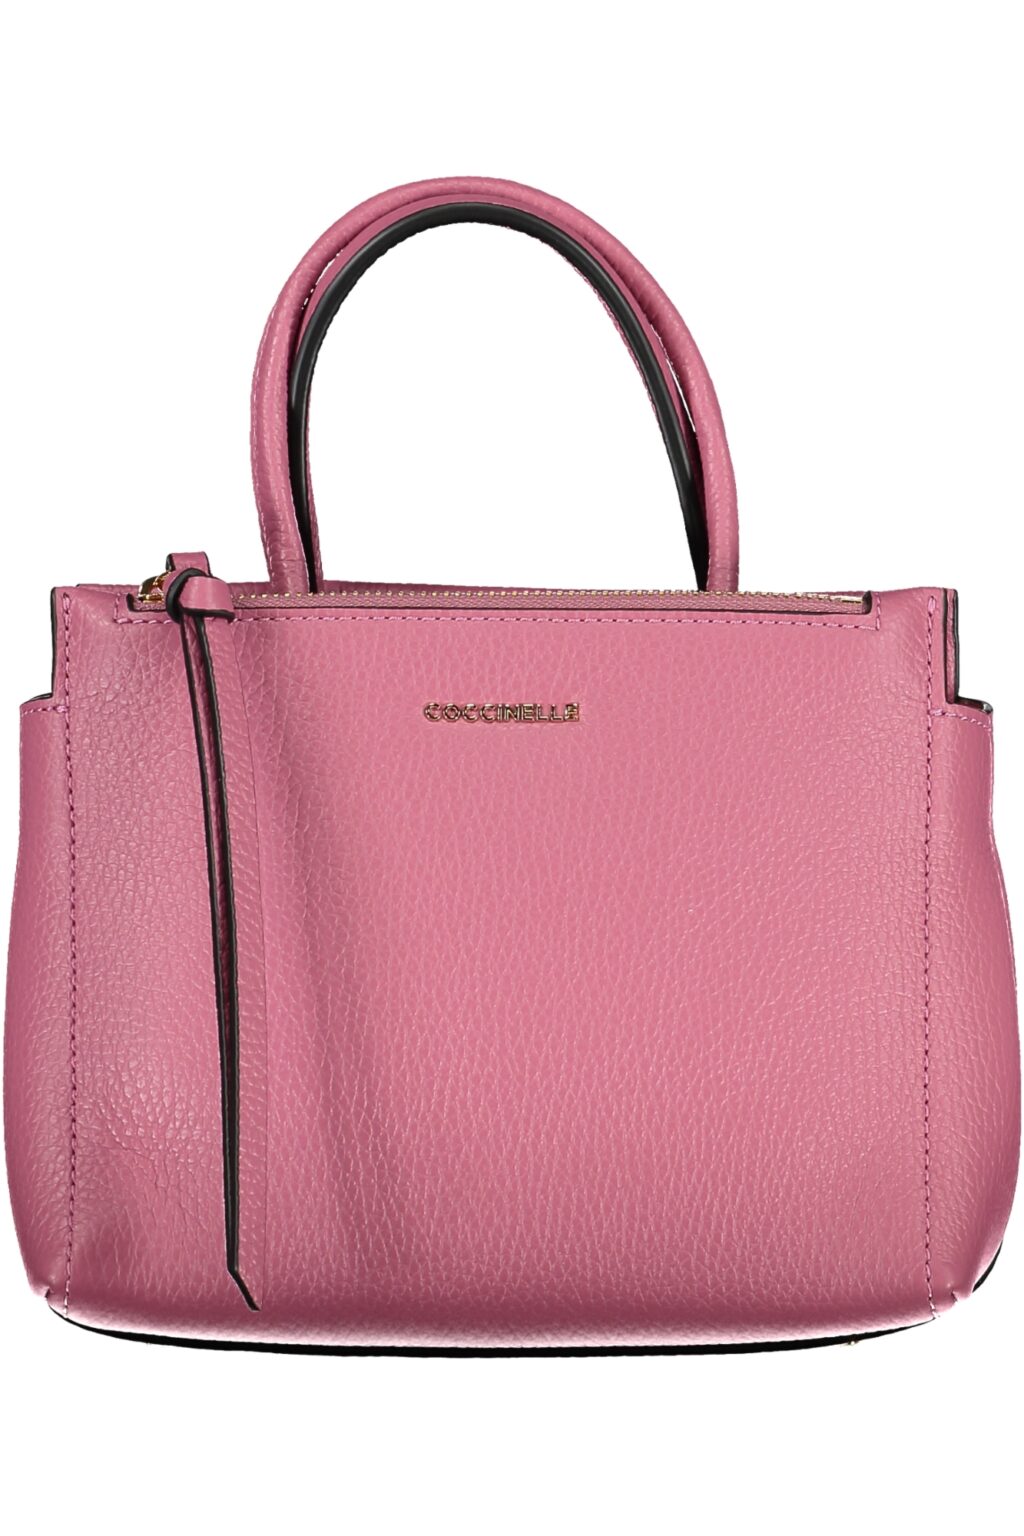 COCCINELLE PINK WOMEN'S BAG E1MD5180201_RSV48